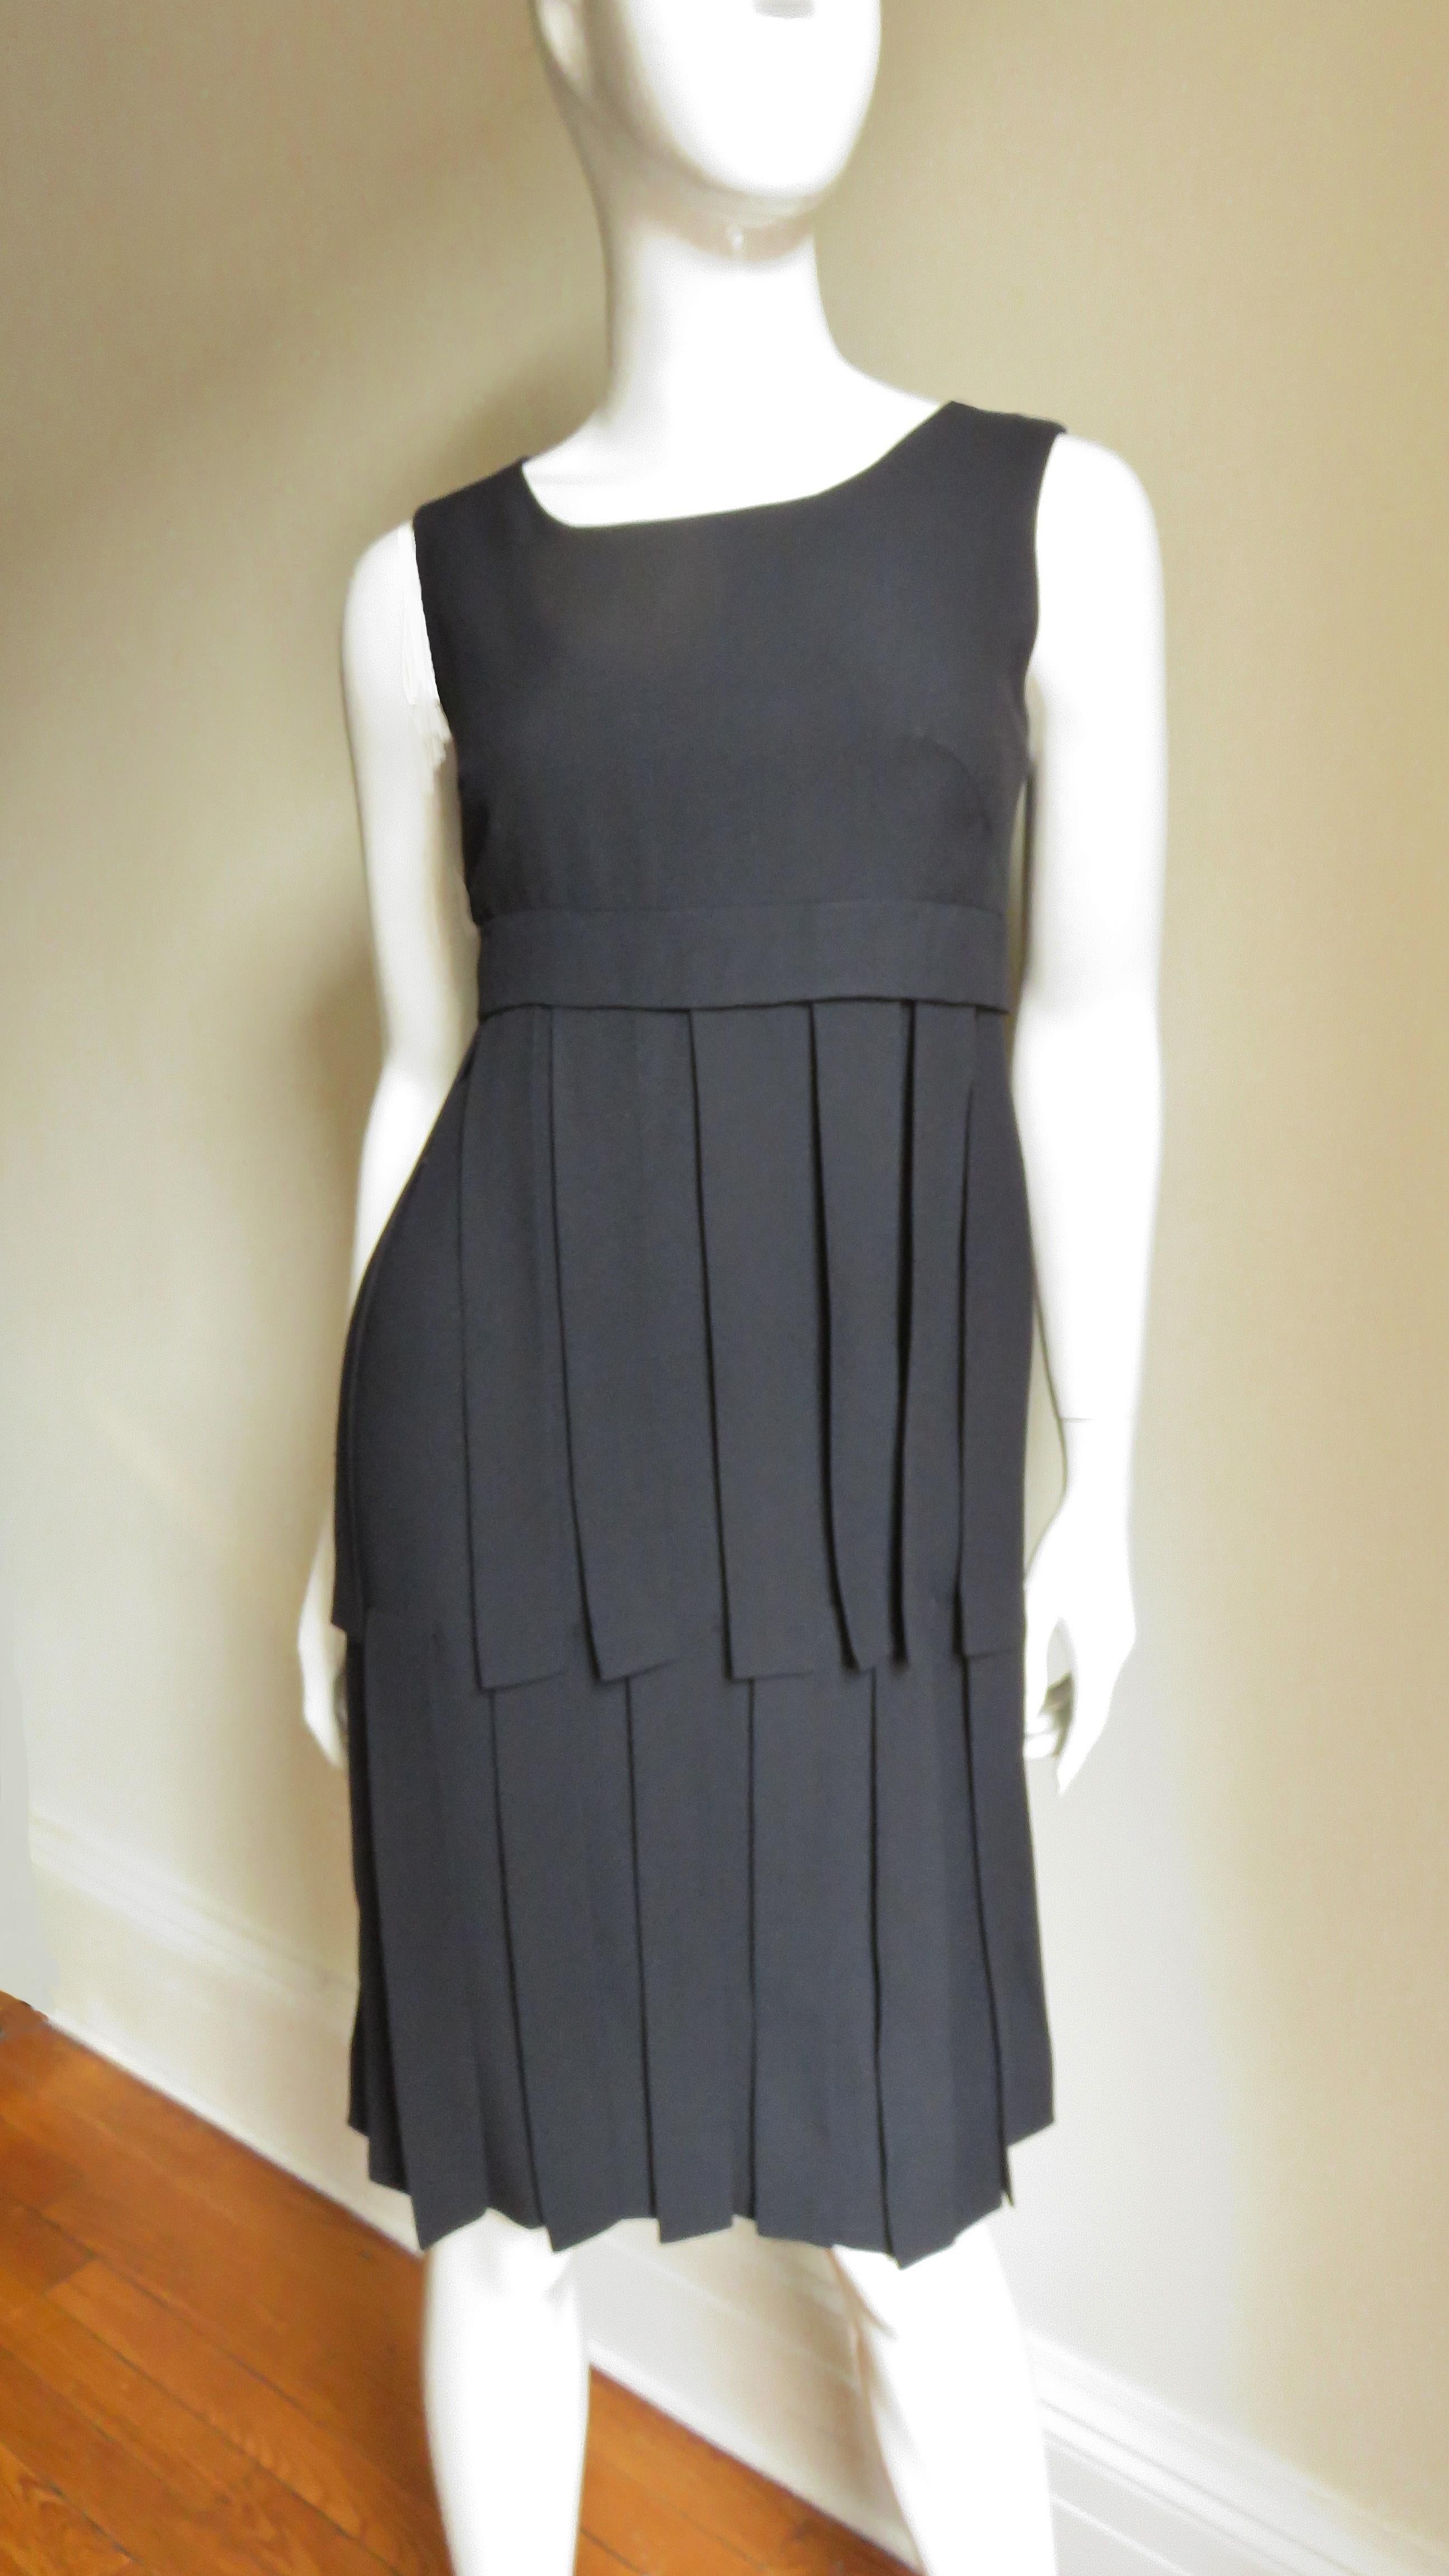 An adorable black dress from Eloise Curtis.  It is a scoop neck sleeveless shift with 2 rows of 12